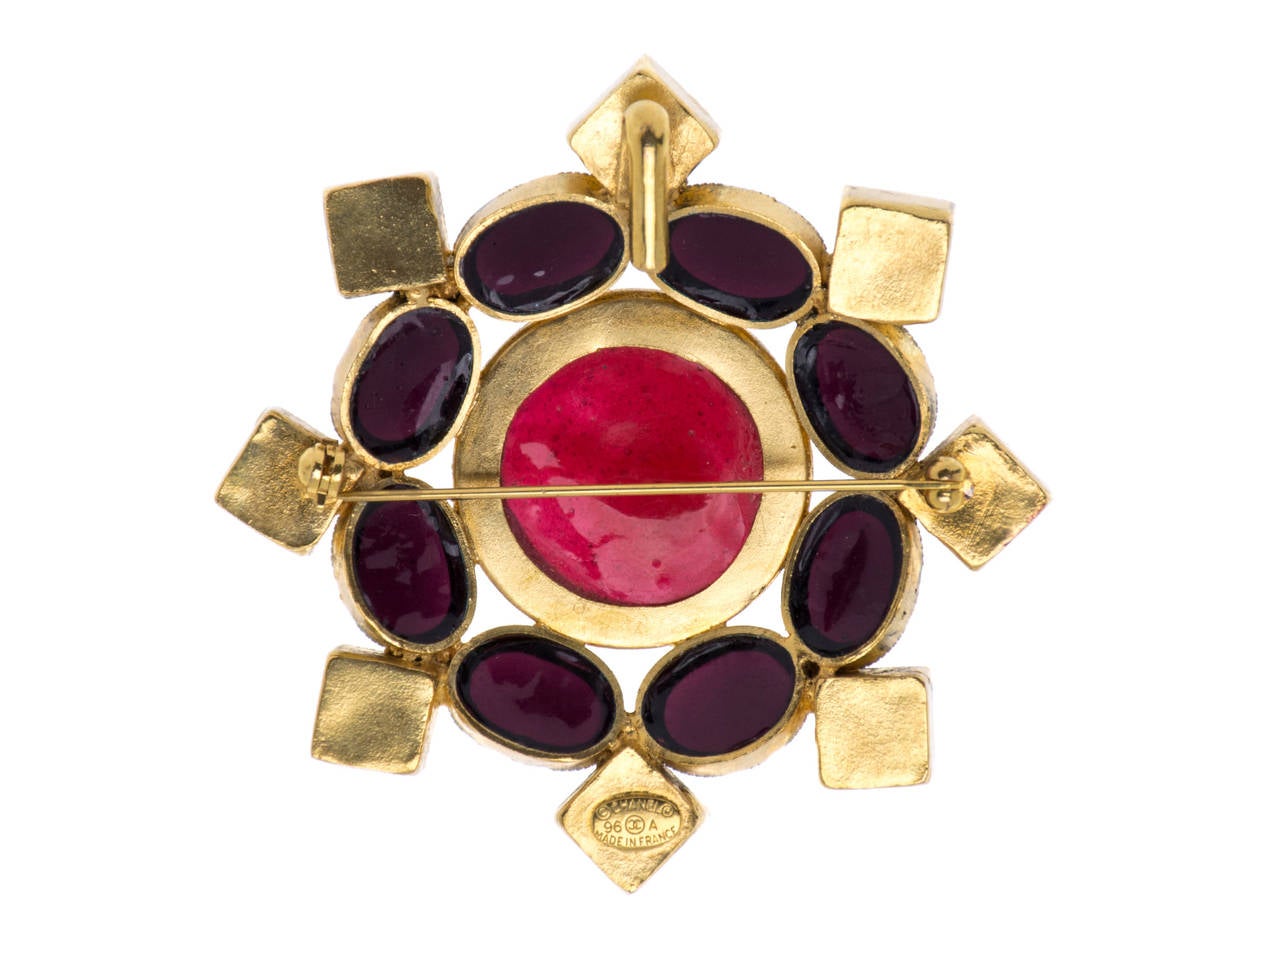 This brooch features a large gold frame accented with large red gripoix glass at the center and square and oval-shaped green and dark purple gripoix pieces around the frame. A 1996 circa. Wear it as a pendant or a brooch.

Measurements: 2